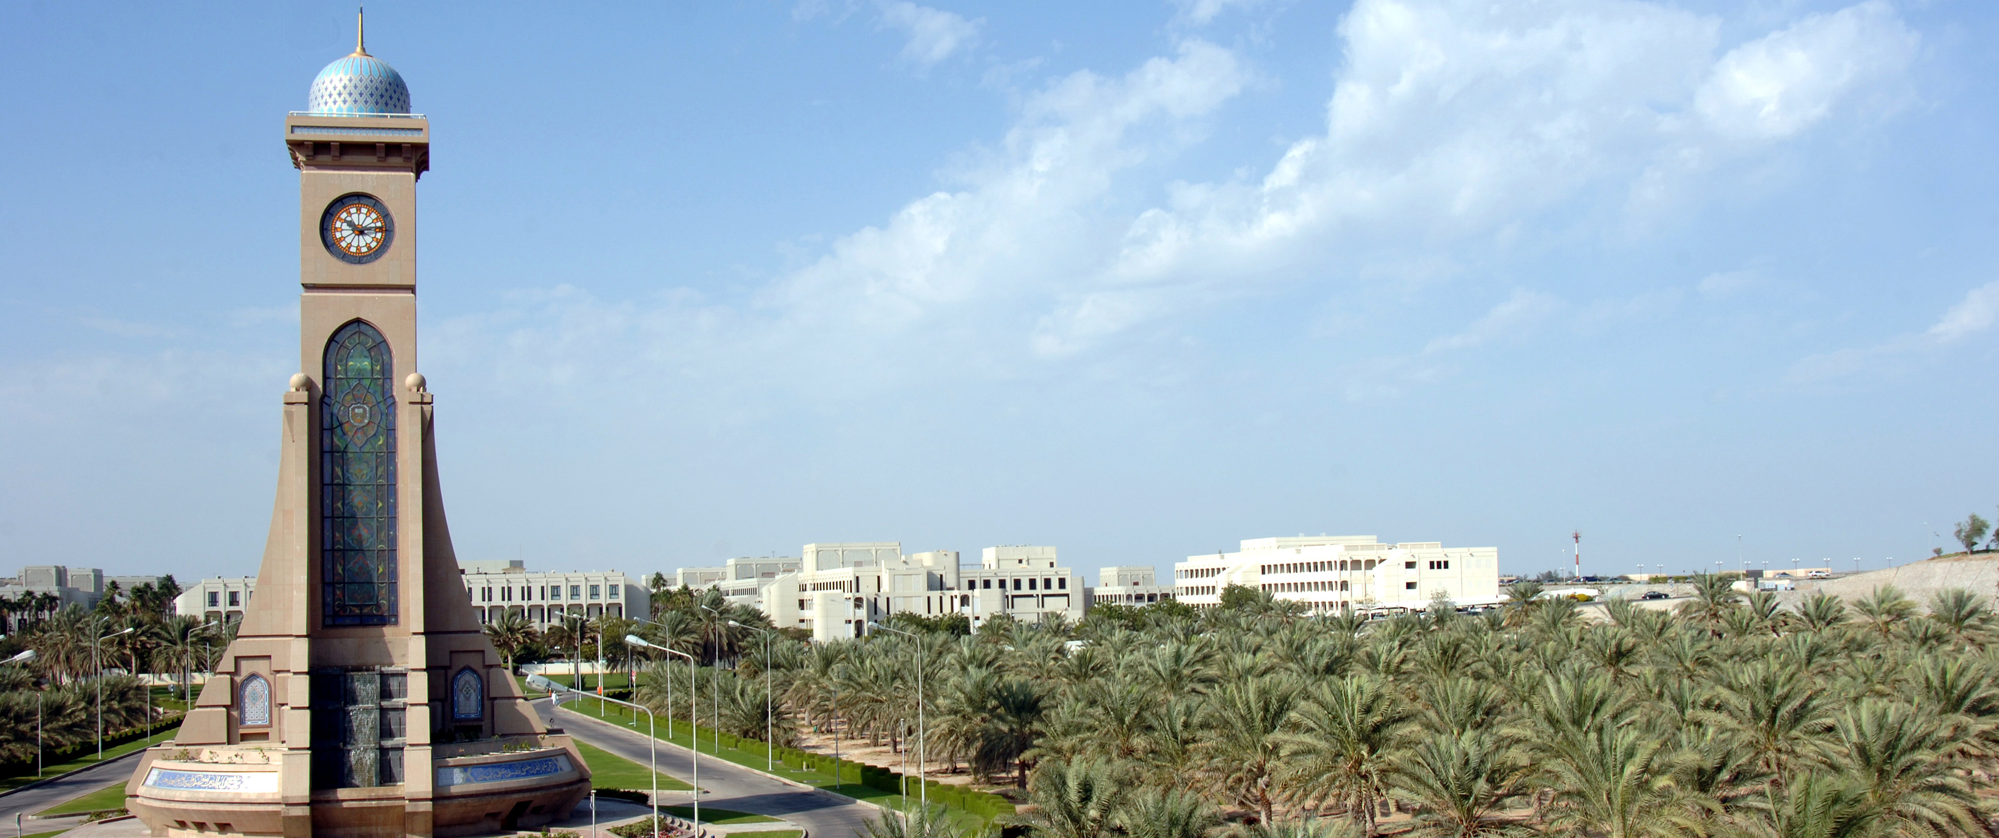 Image of CPS view and SQU tower